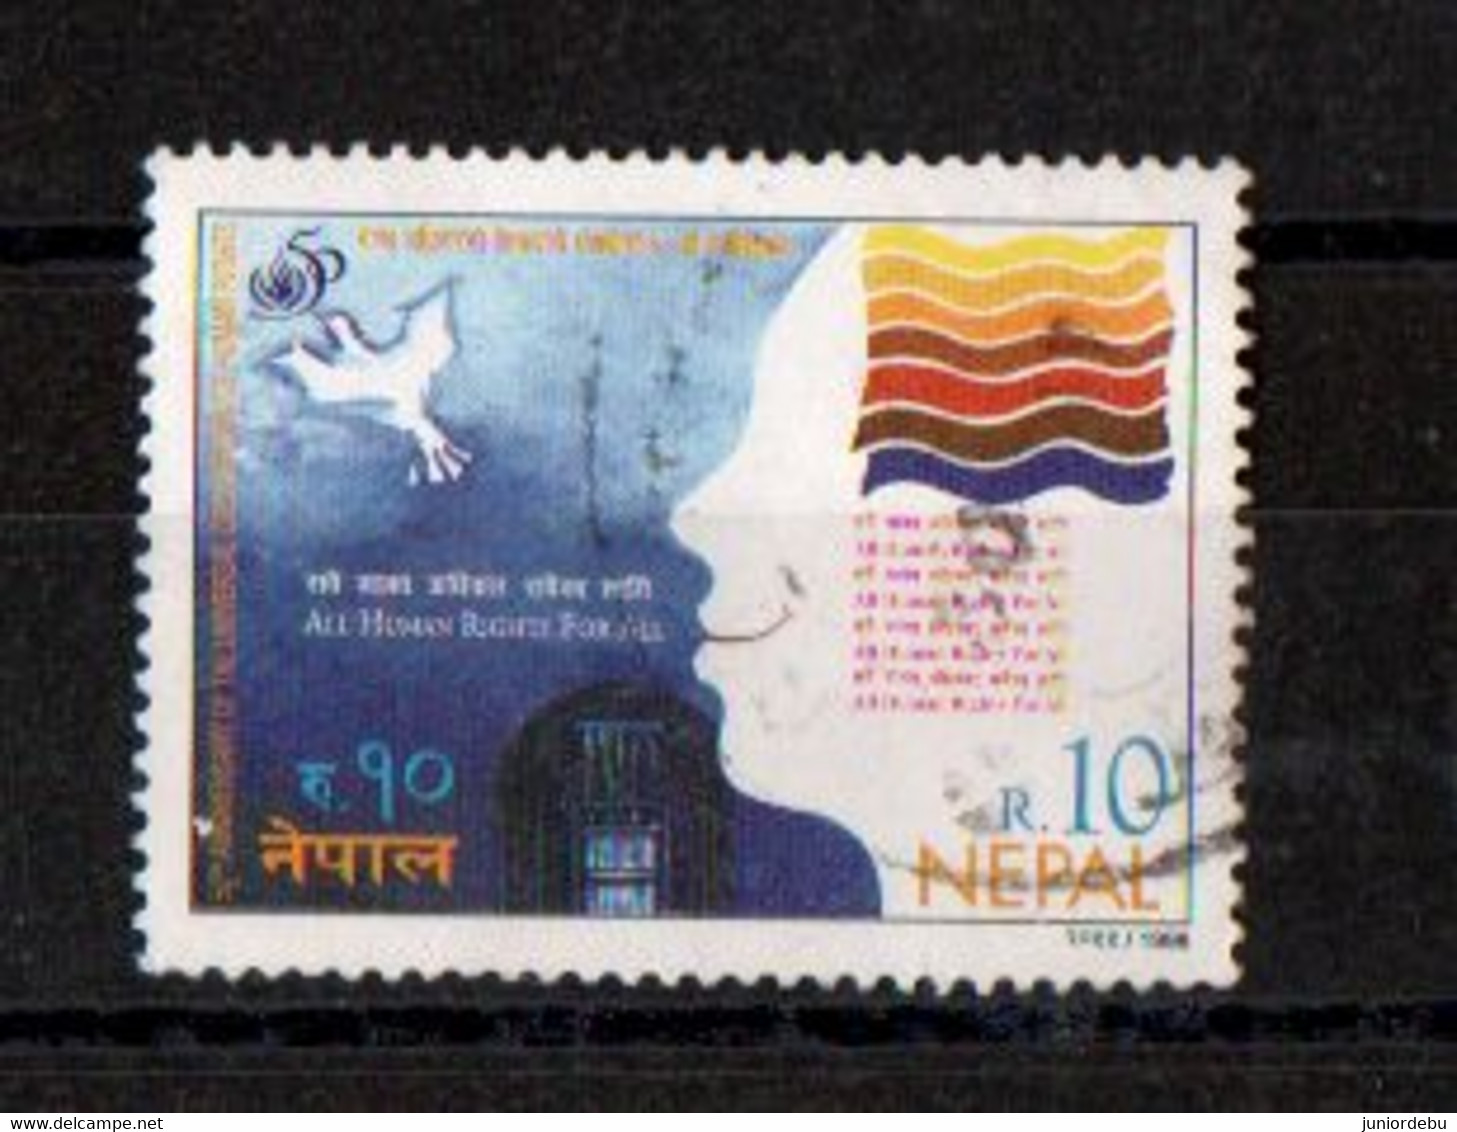 Nepal - 1989 - The 50th Anniversary Of Universal Declaration Of Human Rights   -  Used. Condition As Per Scan - Népal